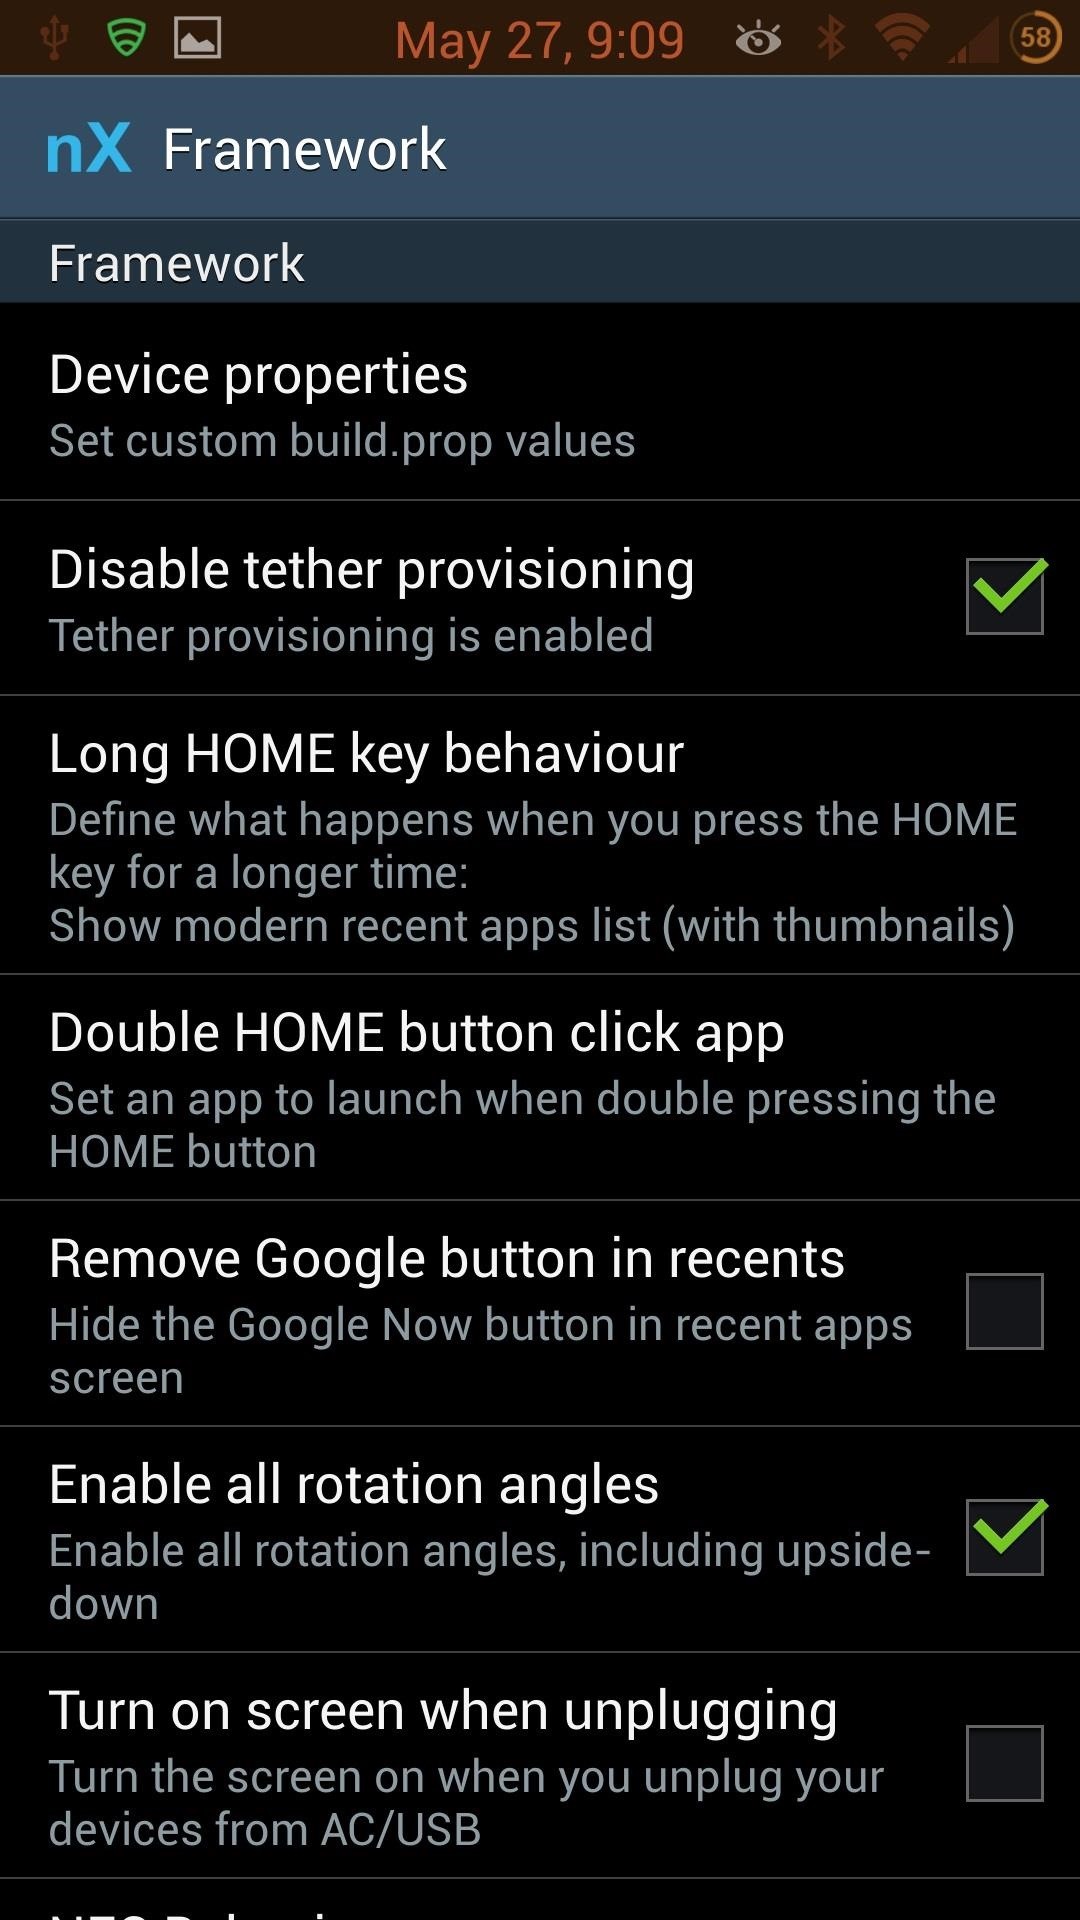 How to Get 70+ SoftMods on Your Samsung Galaxy S4 for No-Fuss Customization at Your Fingertips